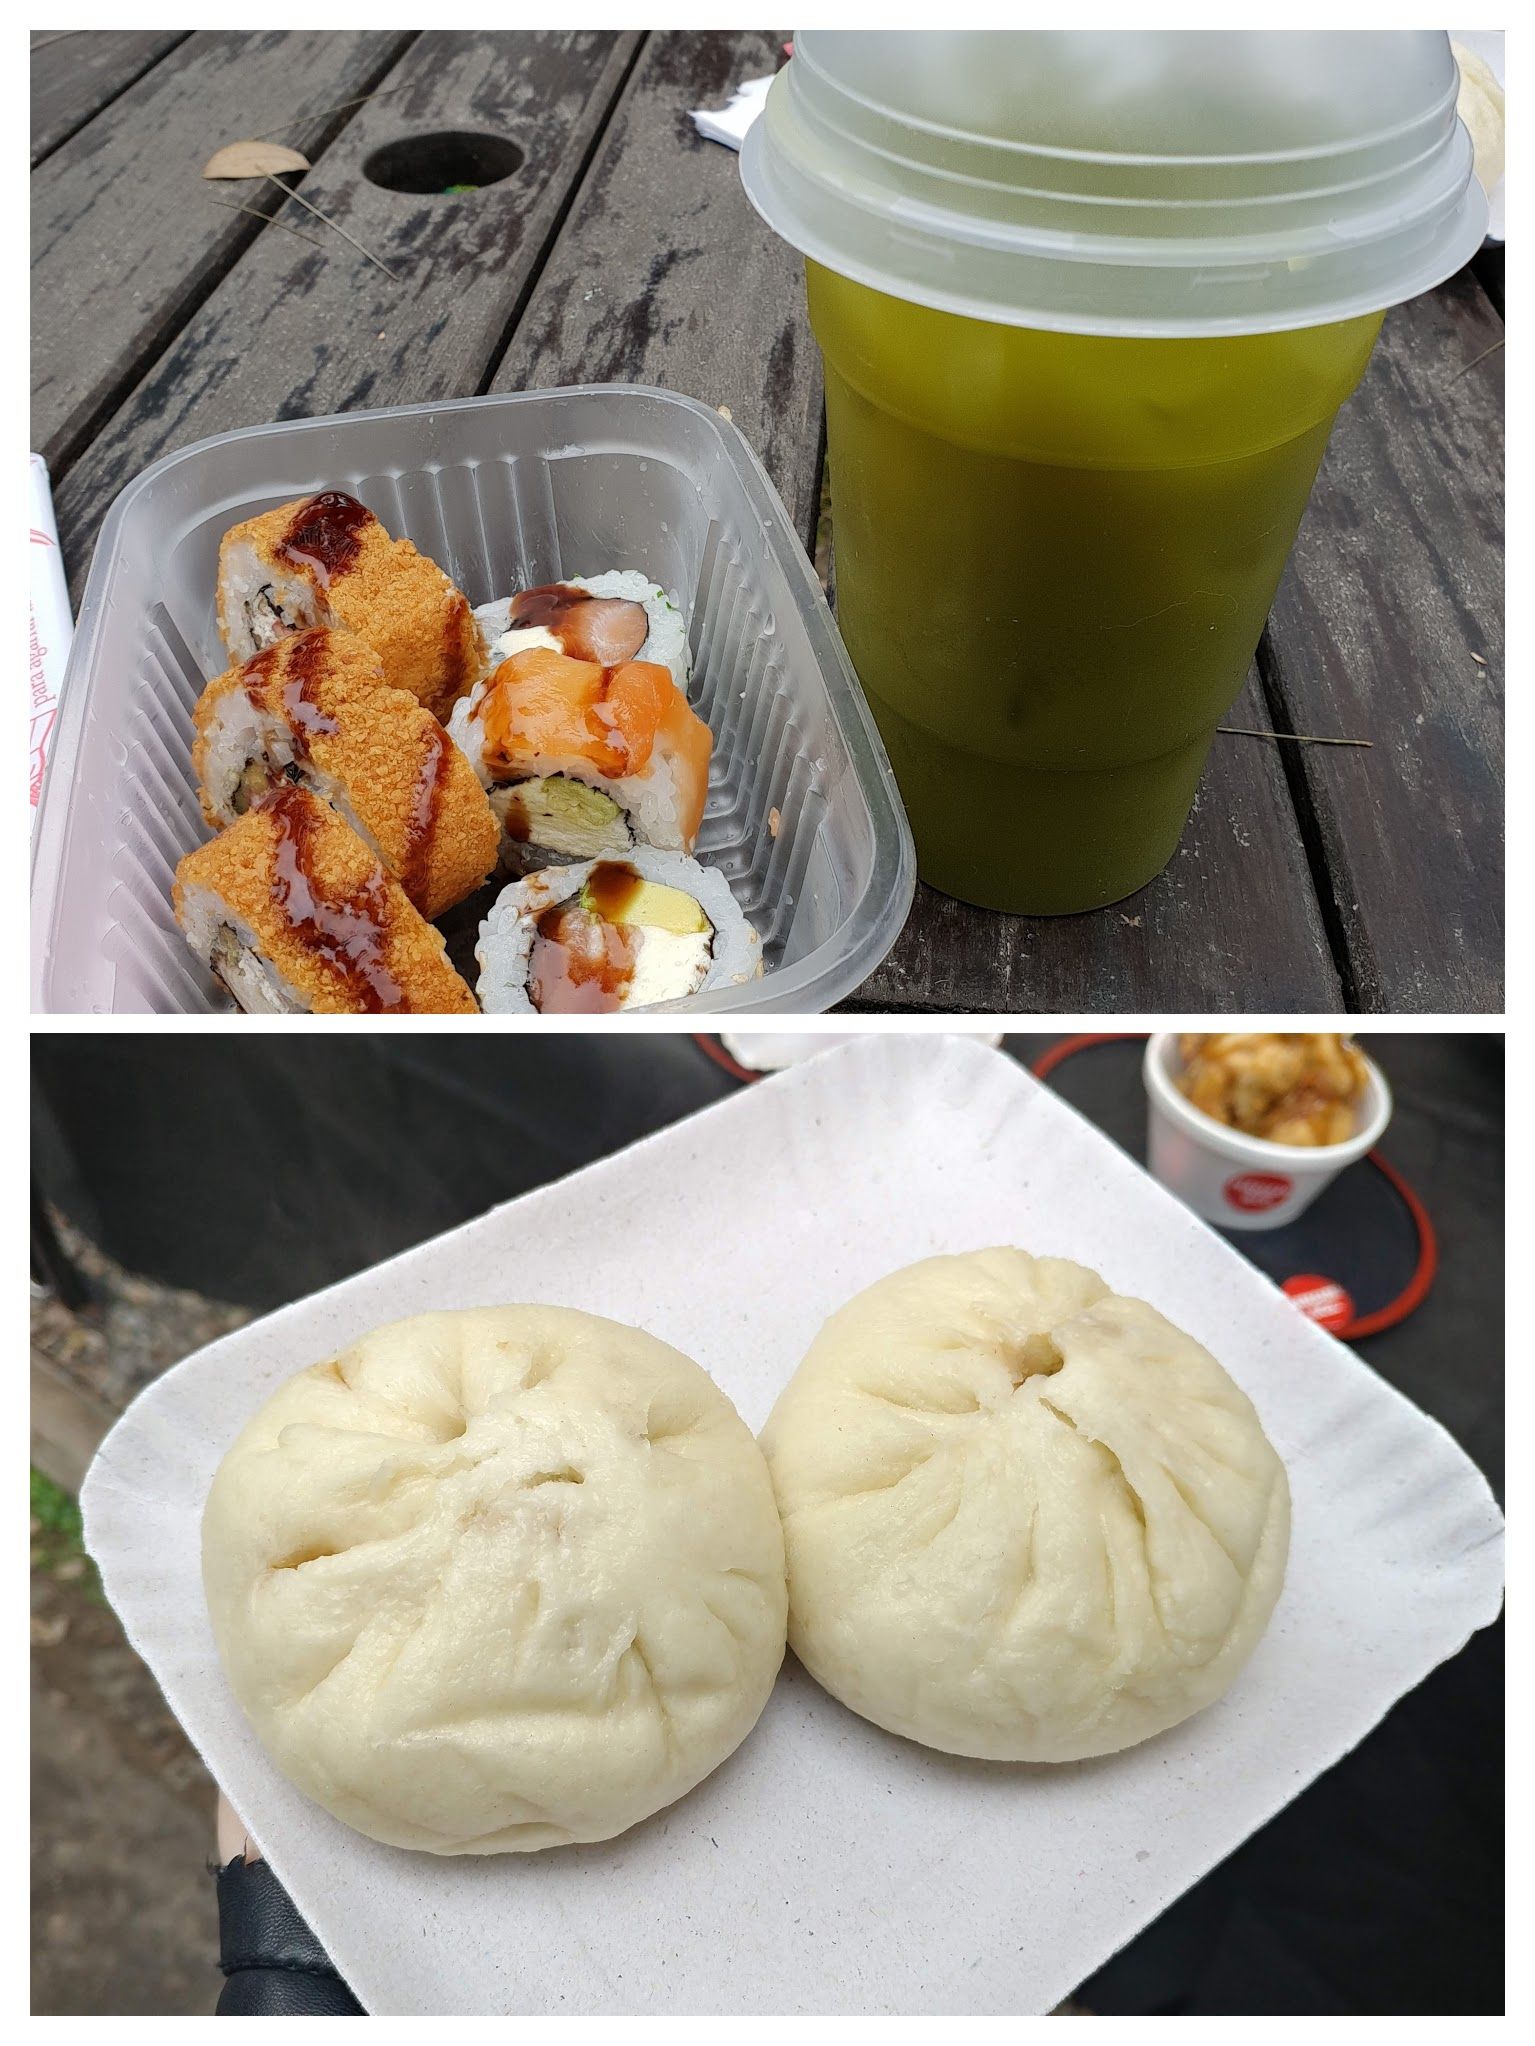 Caption: On the top, a photo of sushi and a cold Matcha tea, taken by Valeria. On the bottom, a photo of Nikuman (a steamed dumpling) with pork inside.